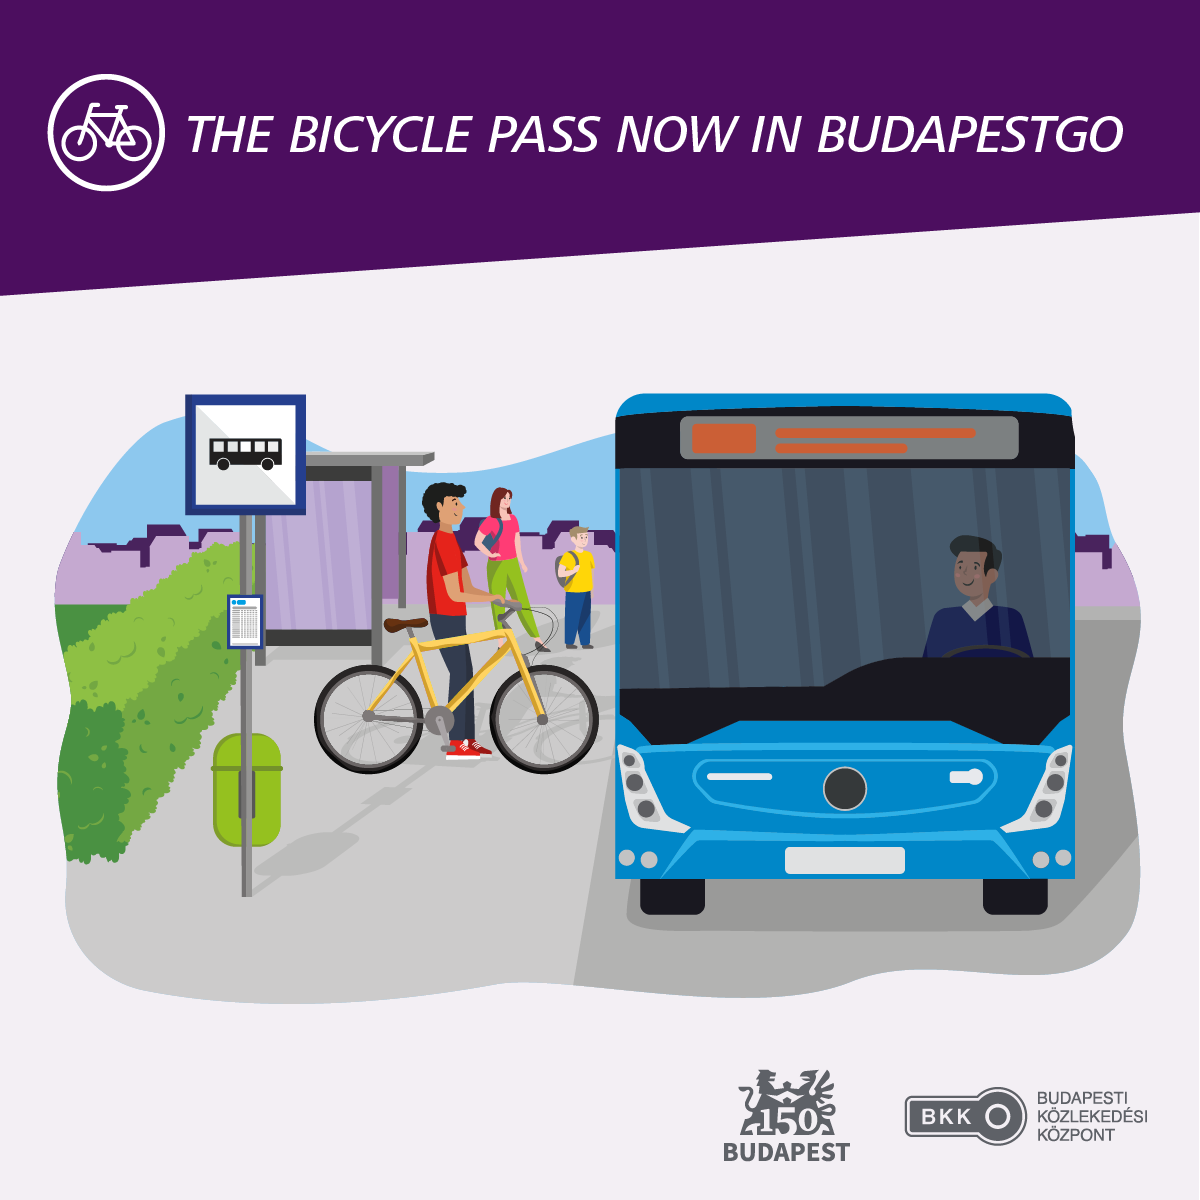 How to use bicycle pass